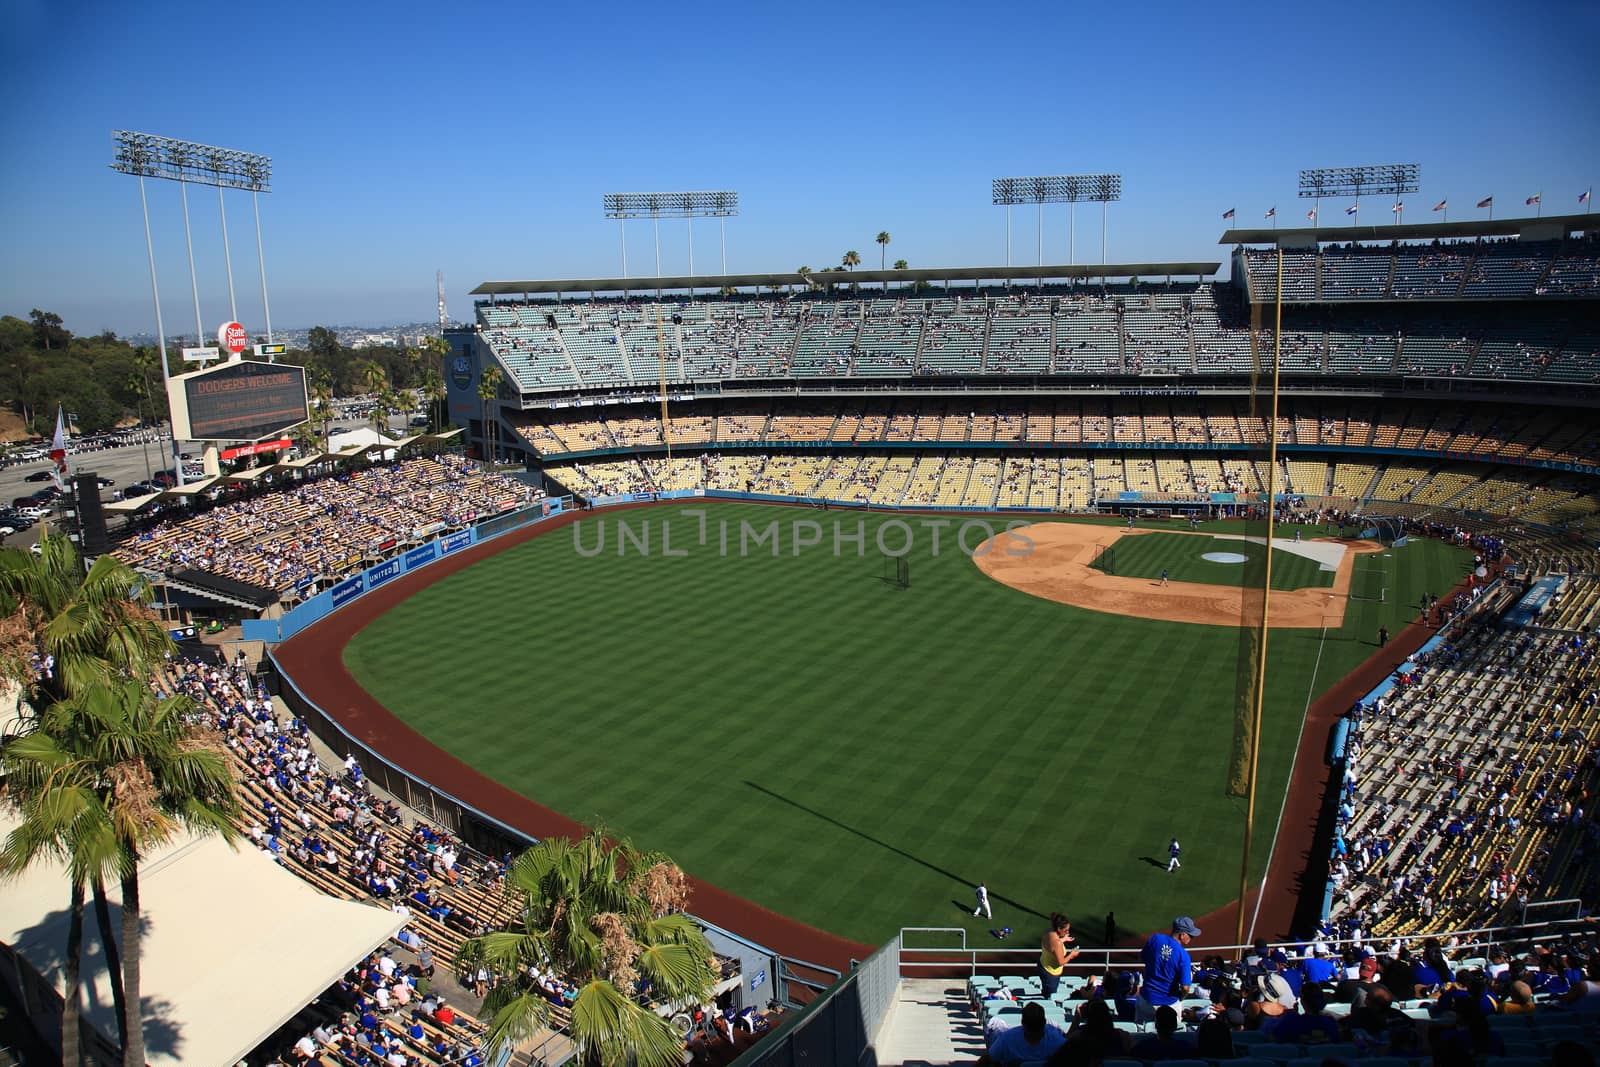 A sunny day baseball game at Dodger Stadium. Outfield view of Dodgers ballpark.